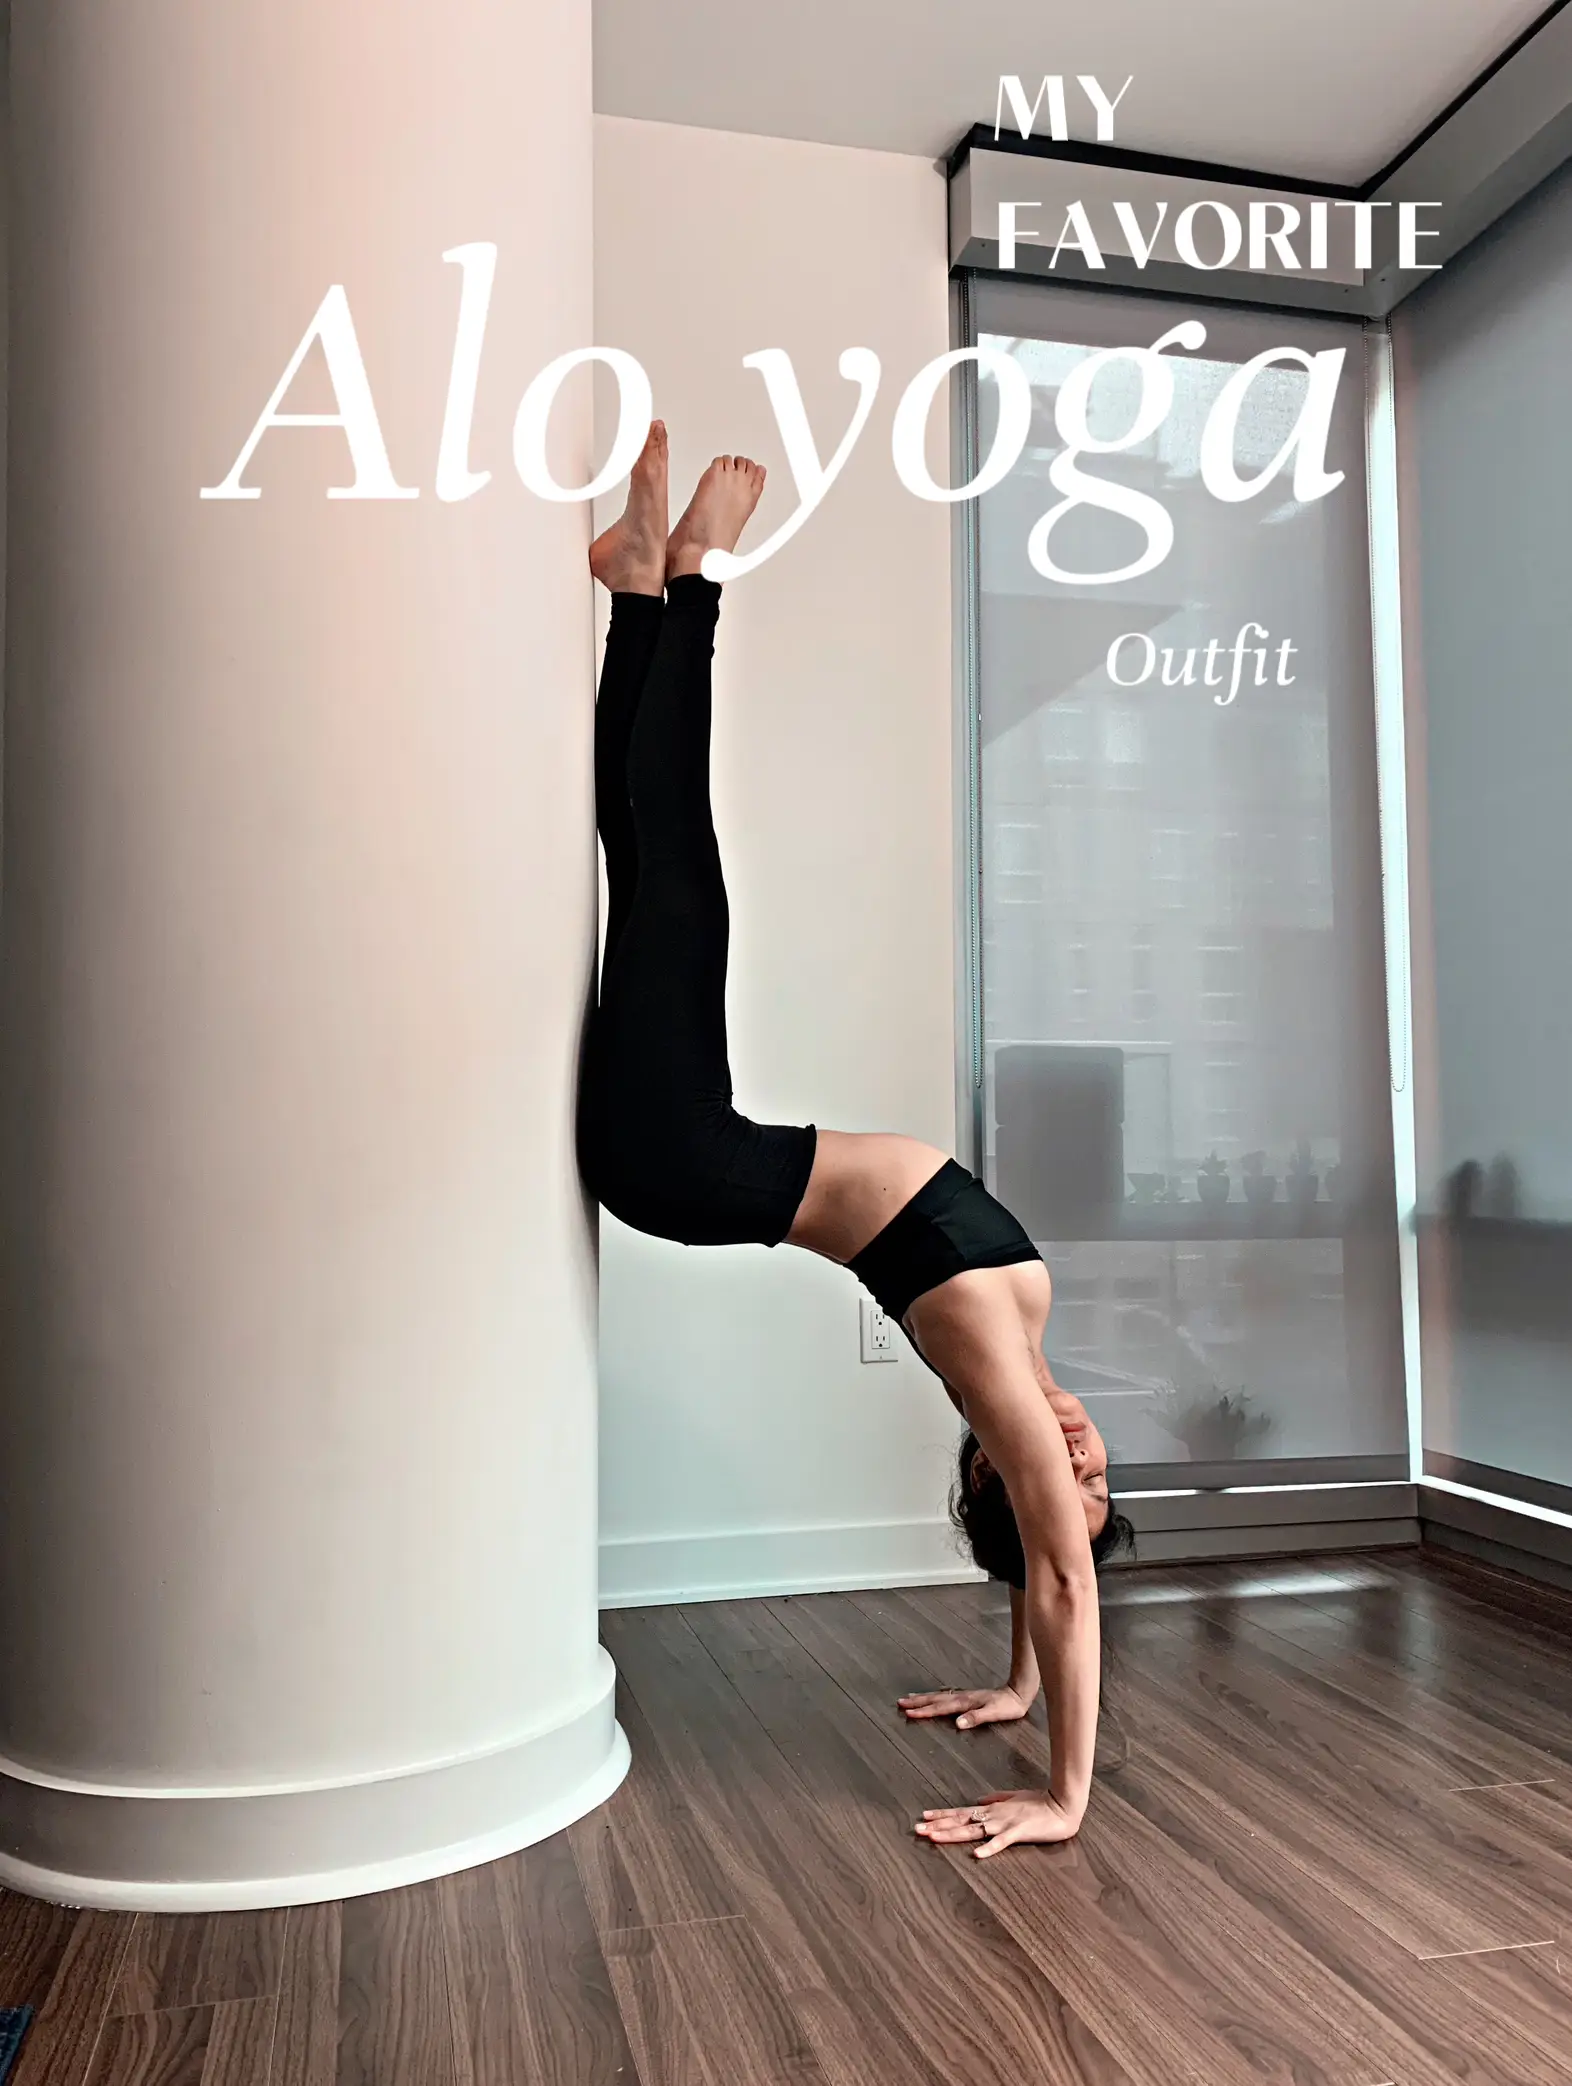 Getting a new @Alo Yoga outfit is always a good idea! I'm obsessed wit